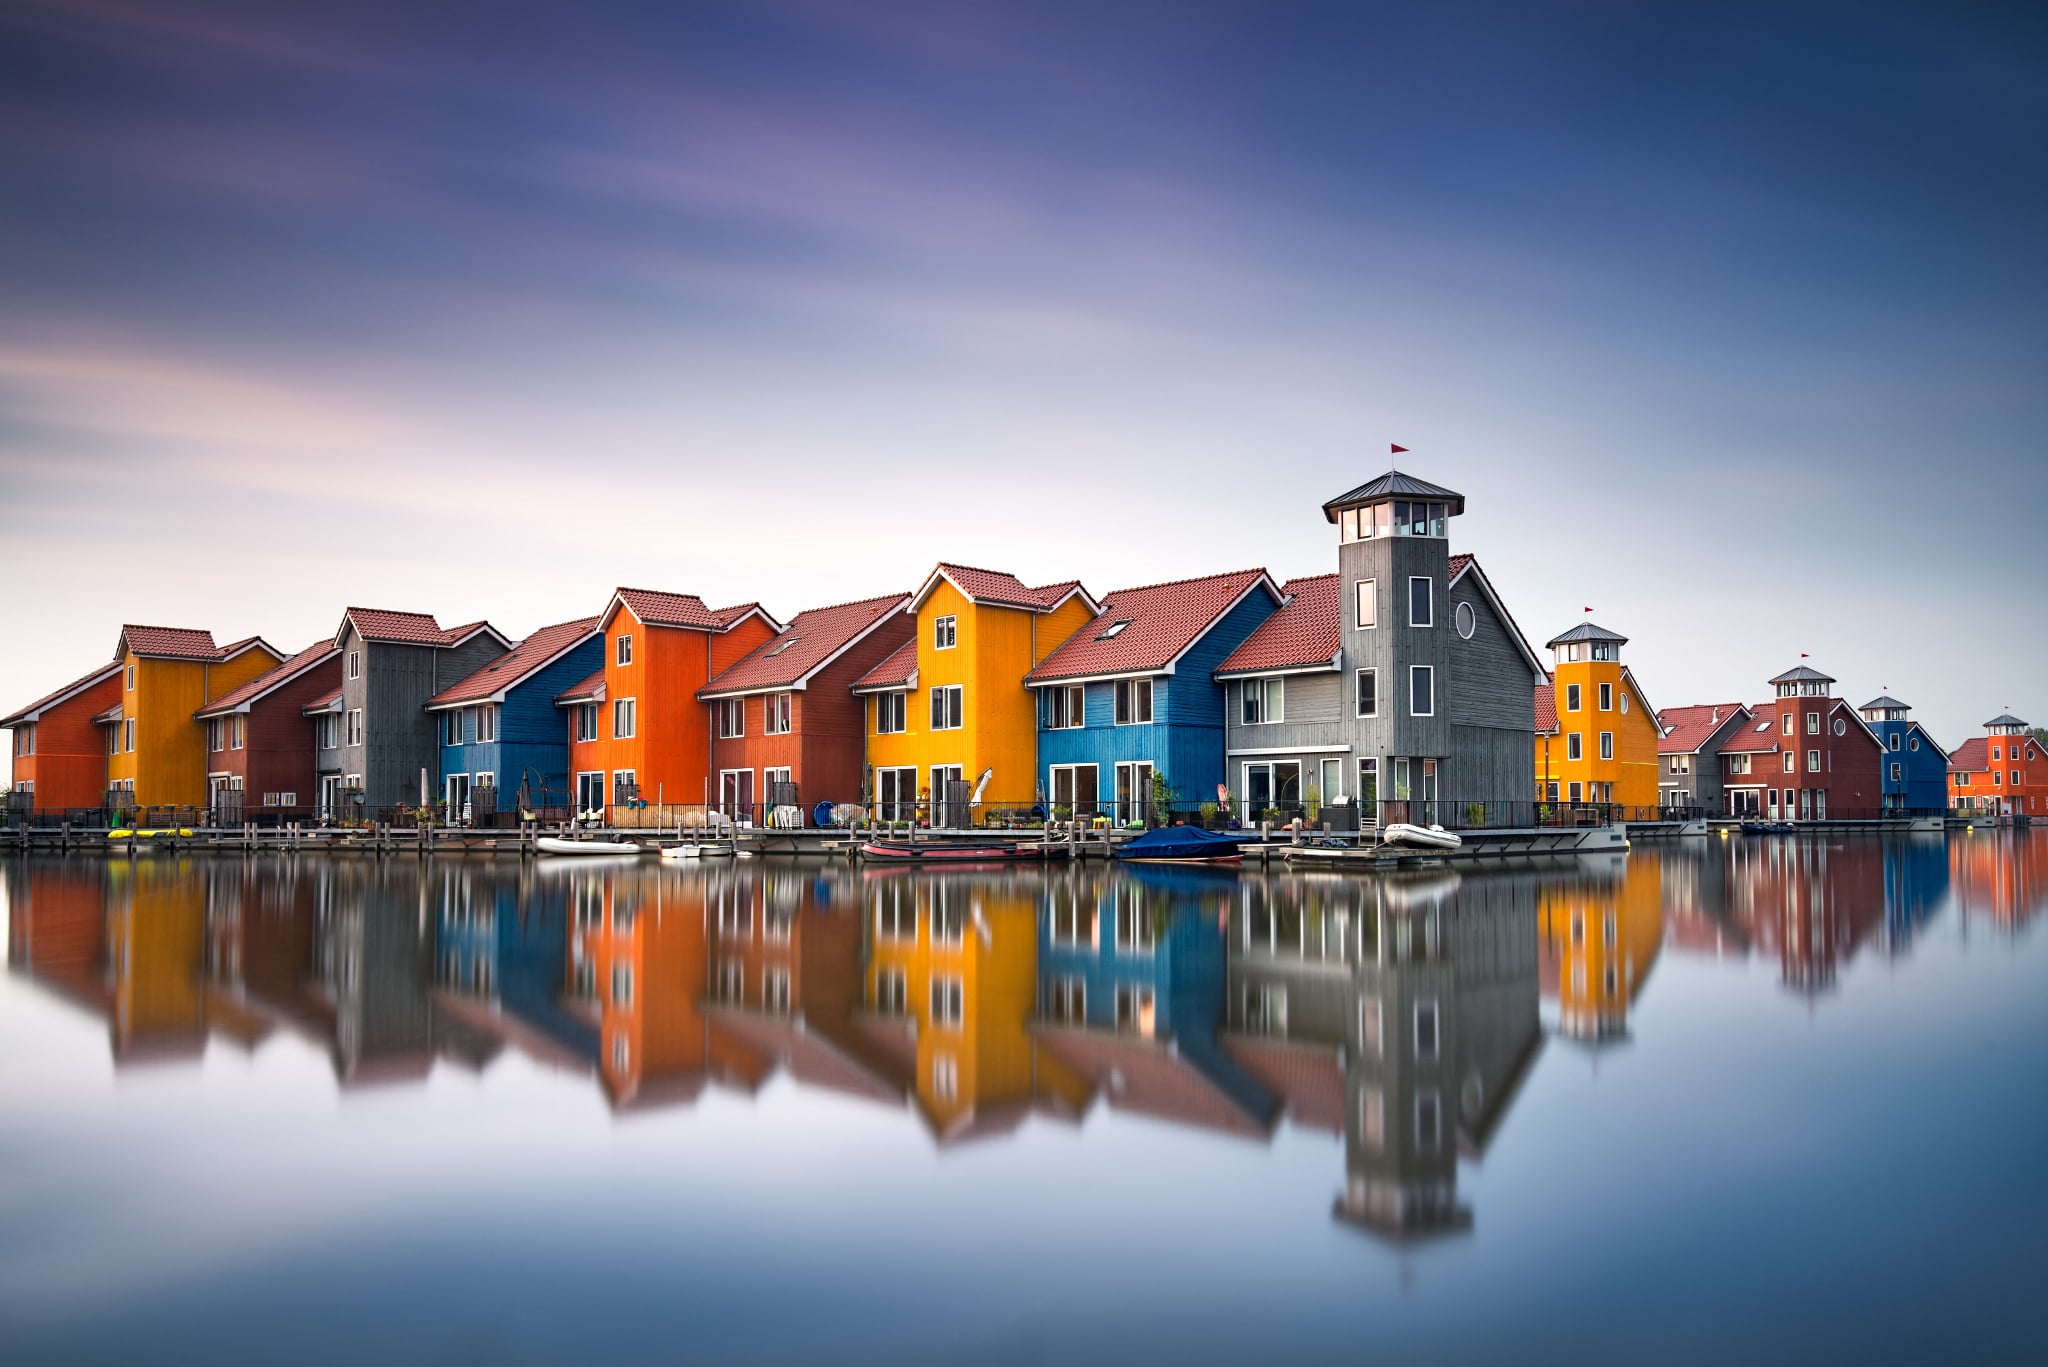 assorted-color concrete houses, water, reflection, colorful, boat